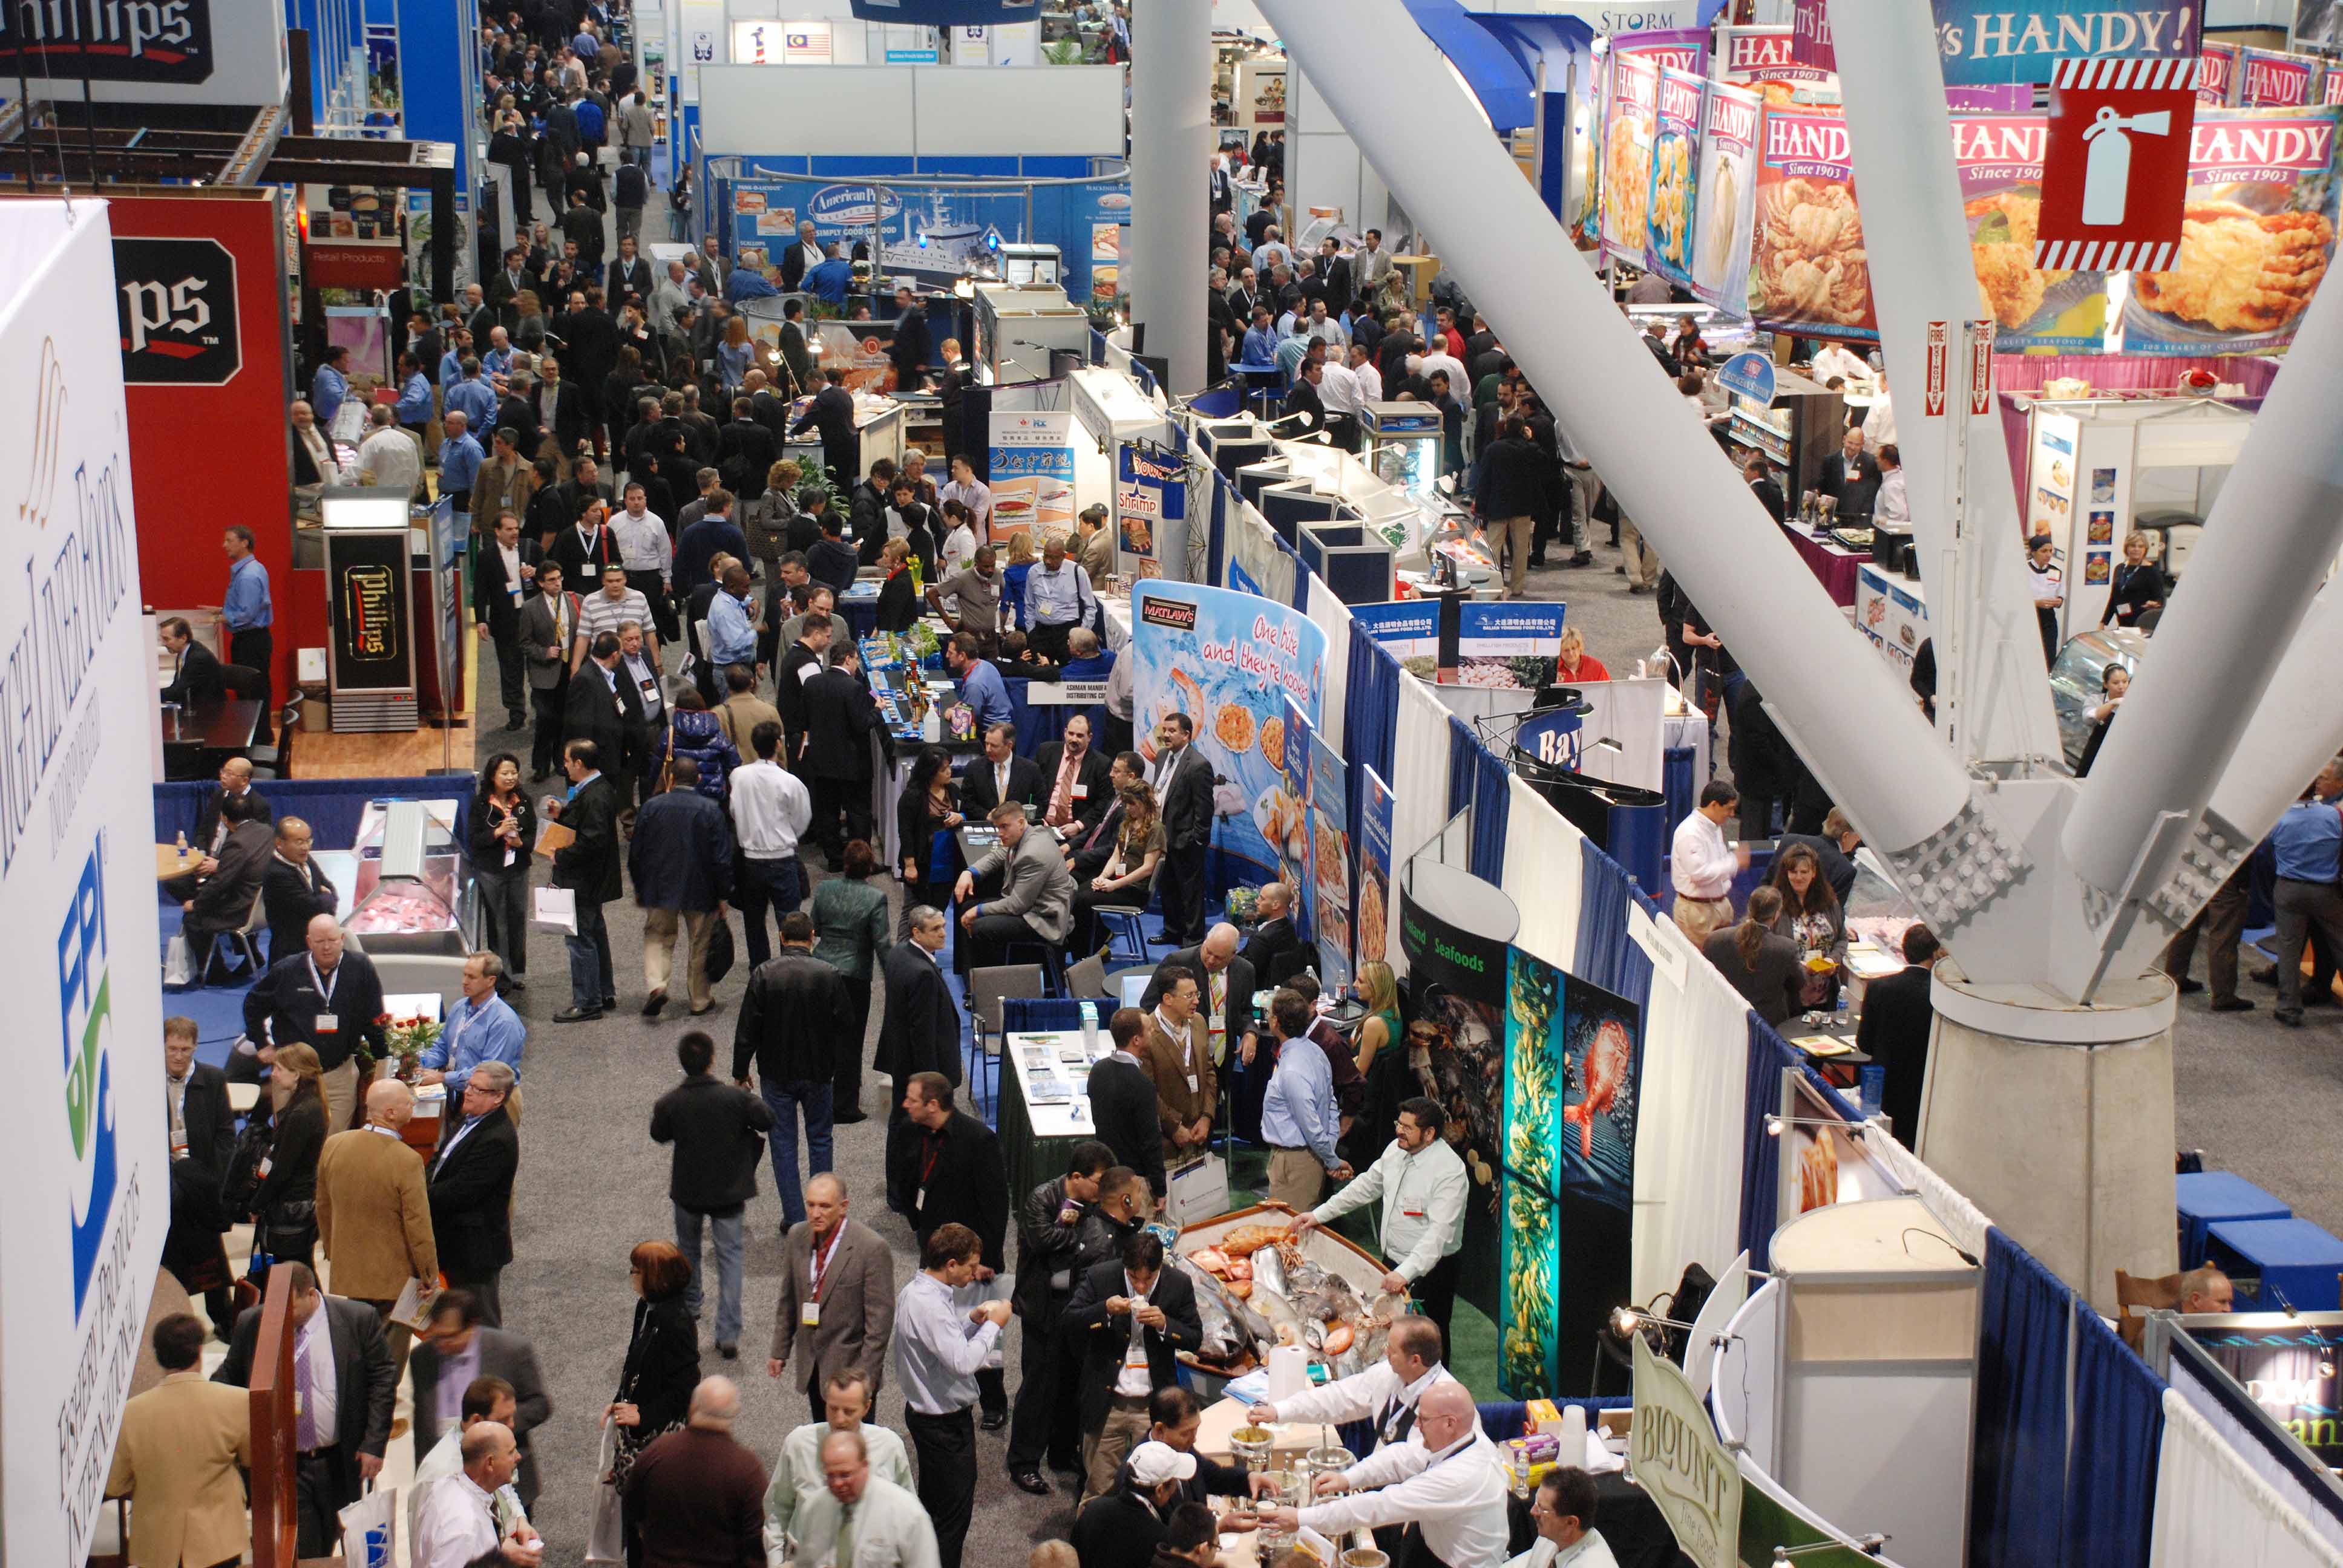 Attendance at the Boston expo is expected to be impacted by the coronavirus 